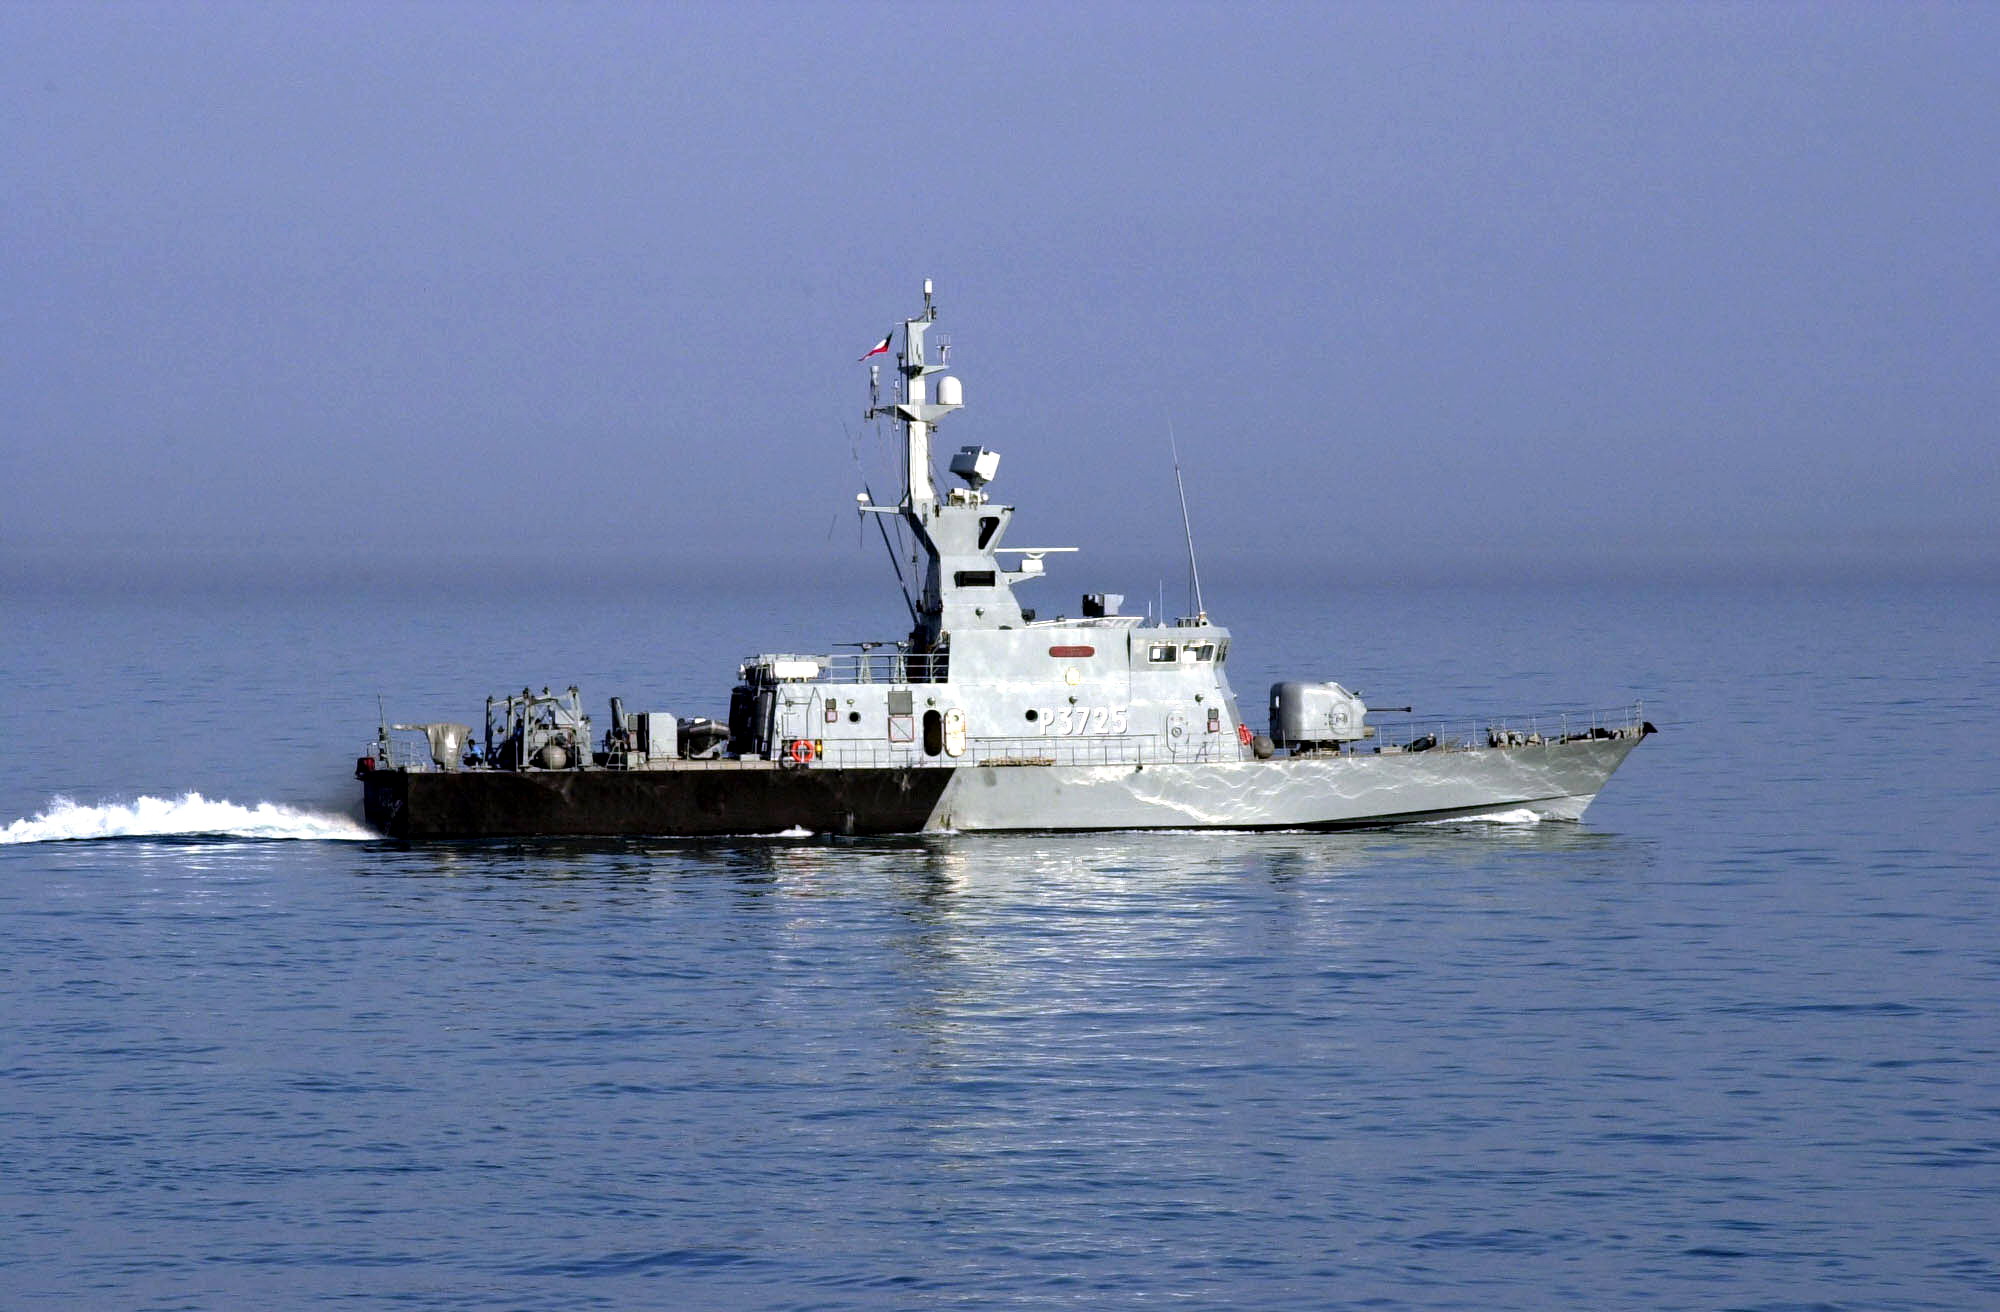 020312-N-6077T-007
At sea with KNS Al-Garoh (P 3725) Mar. 12 2002 -- The Kuwaiti Naval Ship gets underway to conduct a missile firing exercise conducted by the Kuwaiti Navy and coalition forces in the region.  U.S. Navy photo by PhotographerÕs Mate 1st Class Kevin H. Tierney.  (RELEASED)